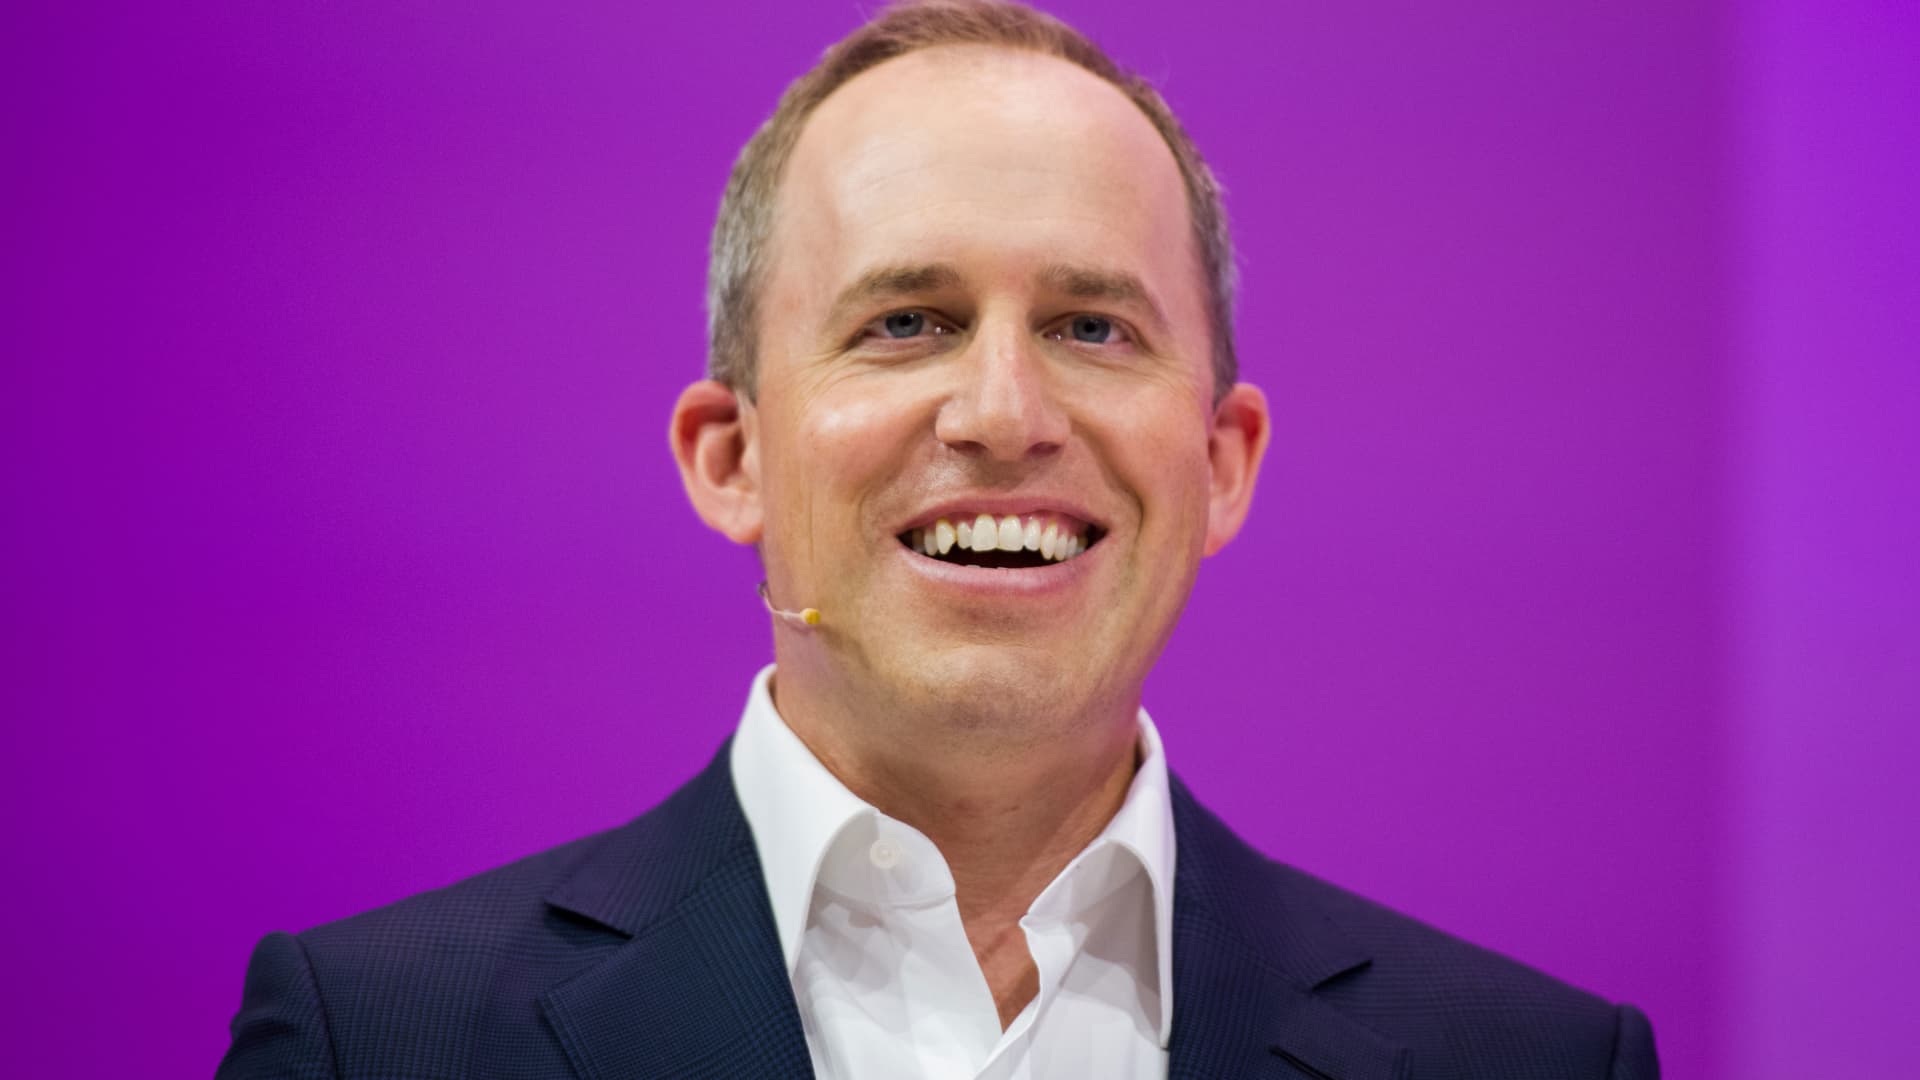 Here’s Bret Taylor’s first big technical move at Salesforce since becoming co-CEO last year